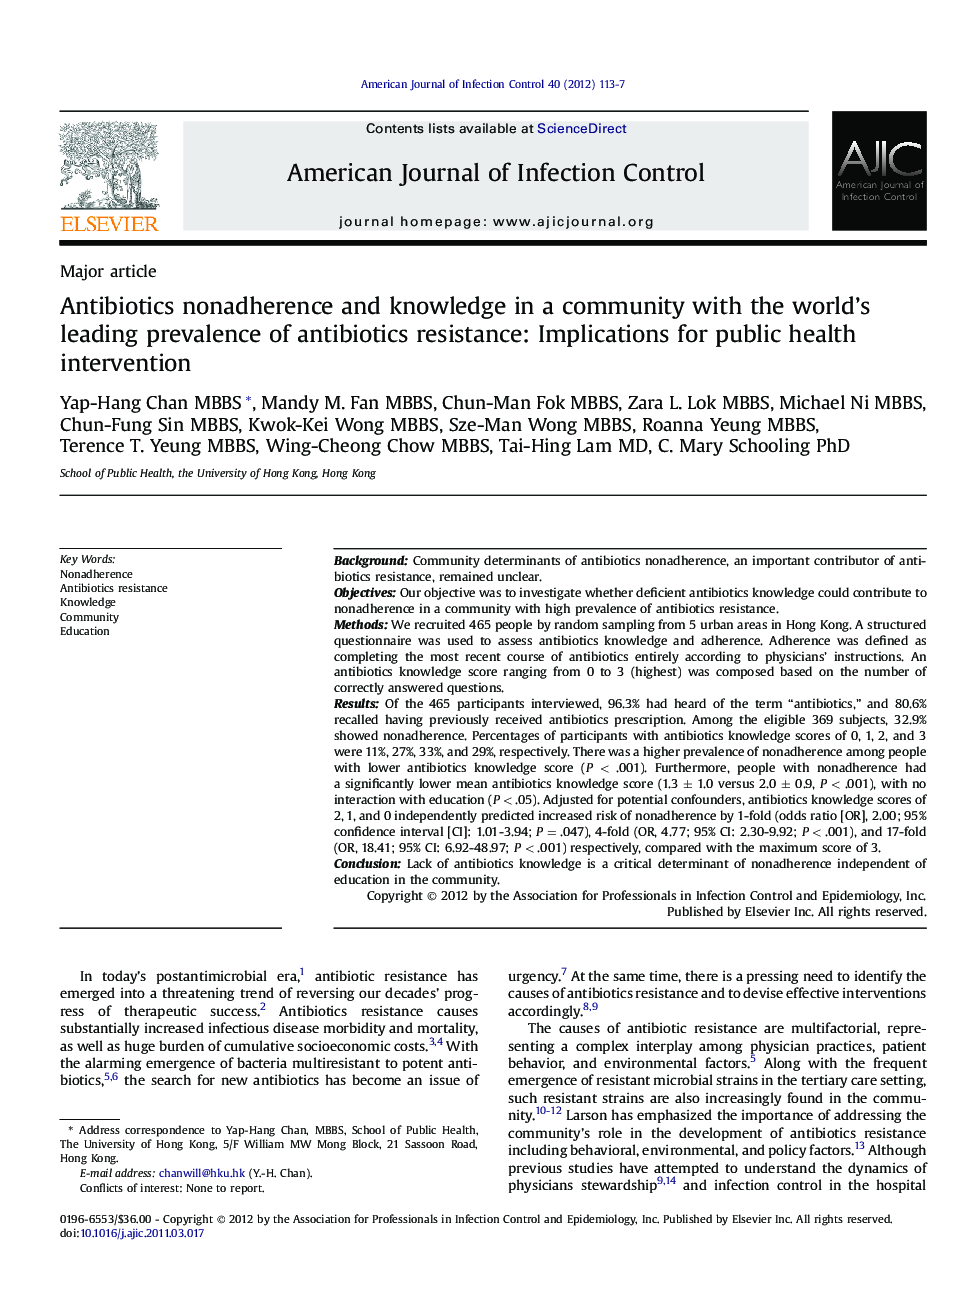 Antibiotics nonadherence and knowledge in a community with the world’s leading prevalence of antibiotics resistance: Implications for public health intervention 